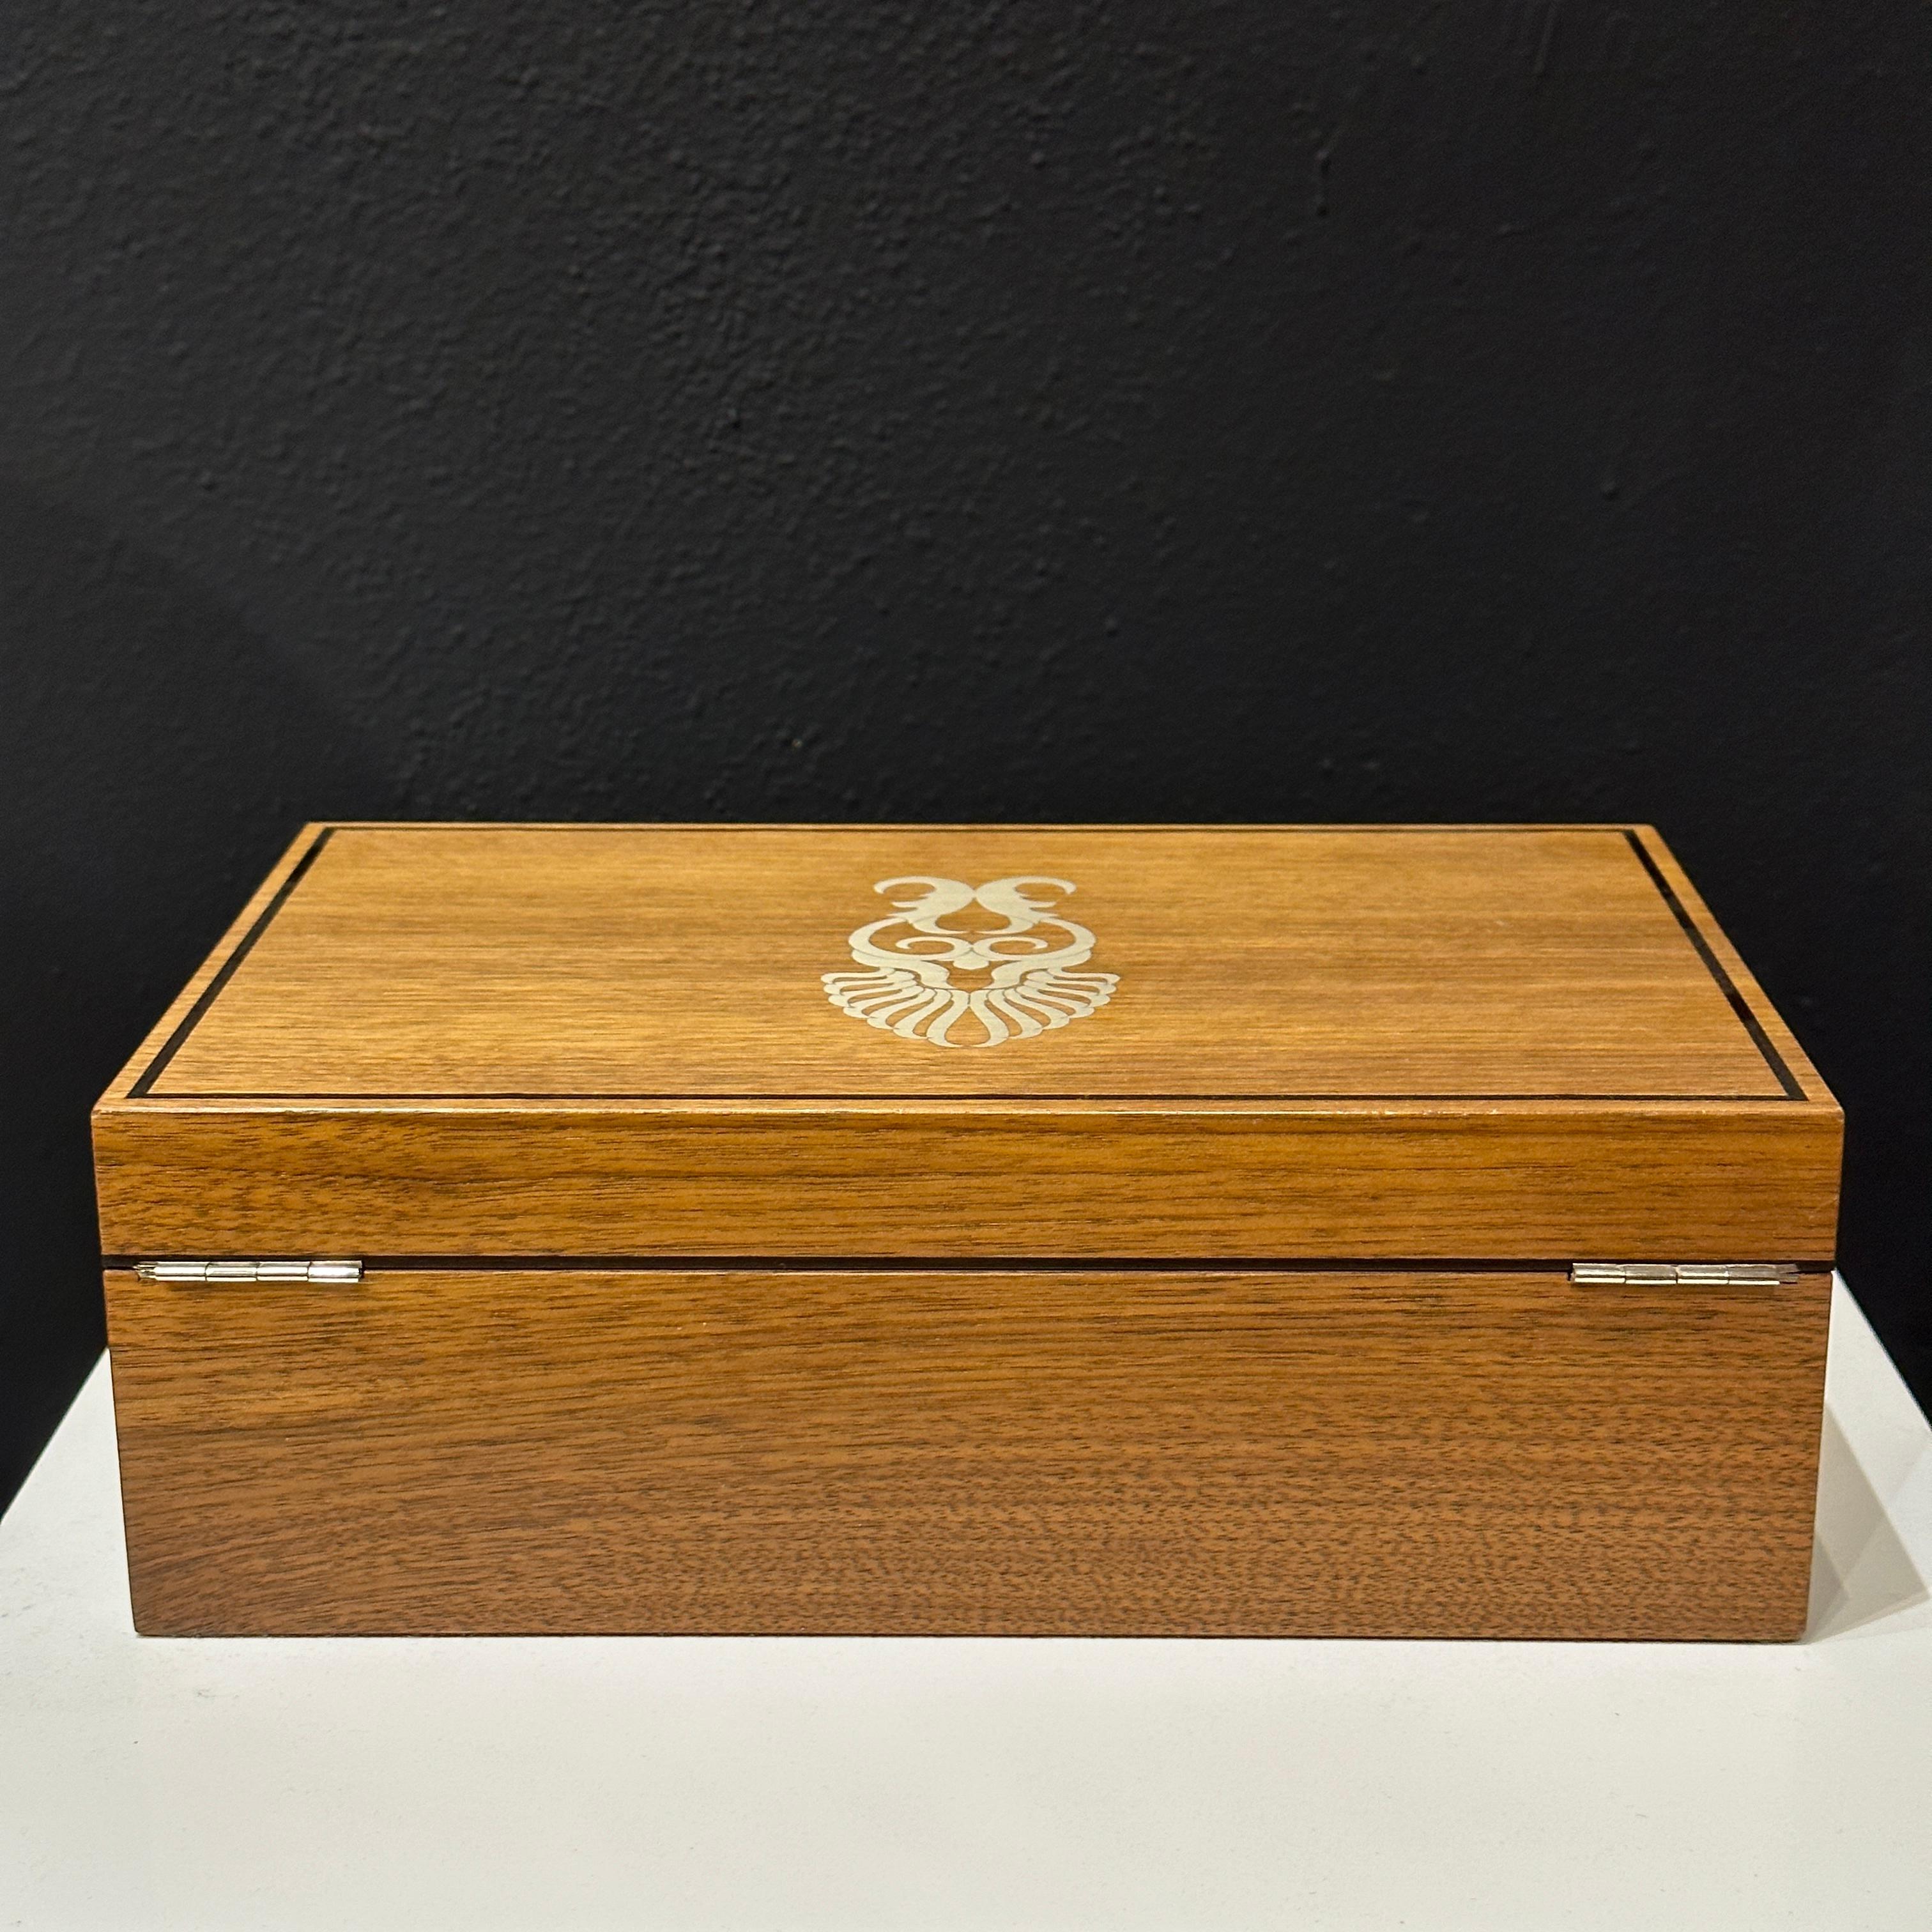 English David Linley London Marquetry Watch and Cufflink Jewelry Box with Key